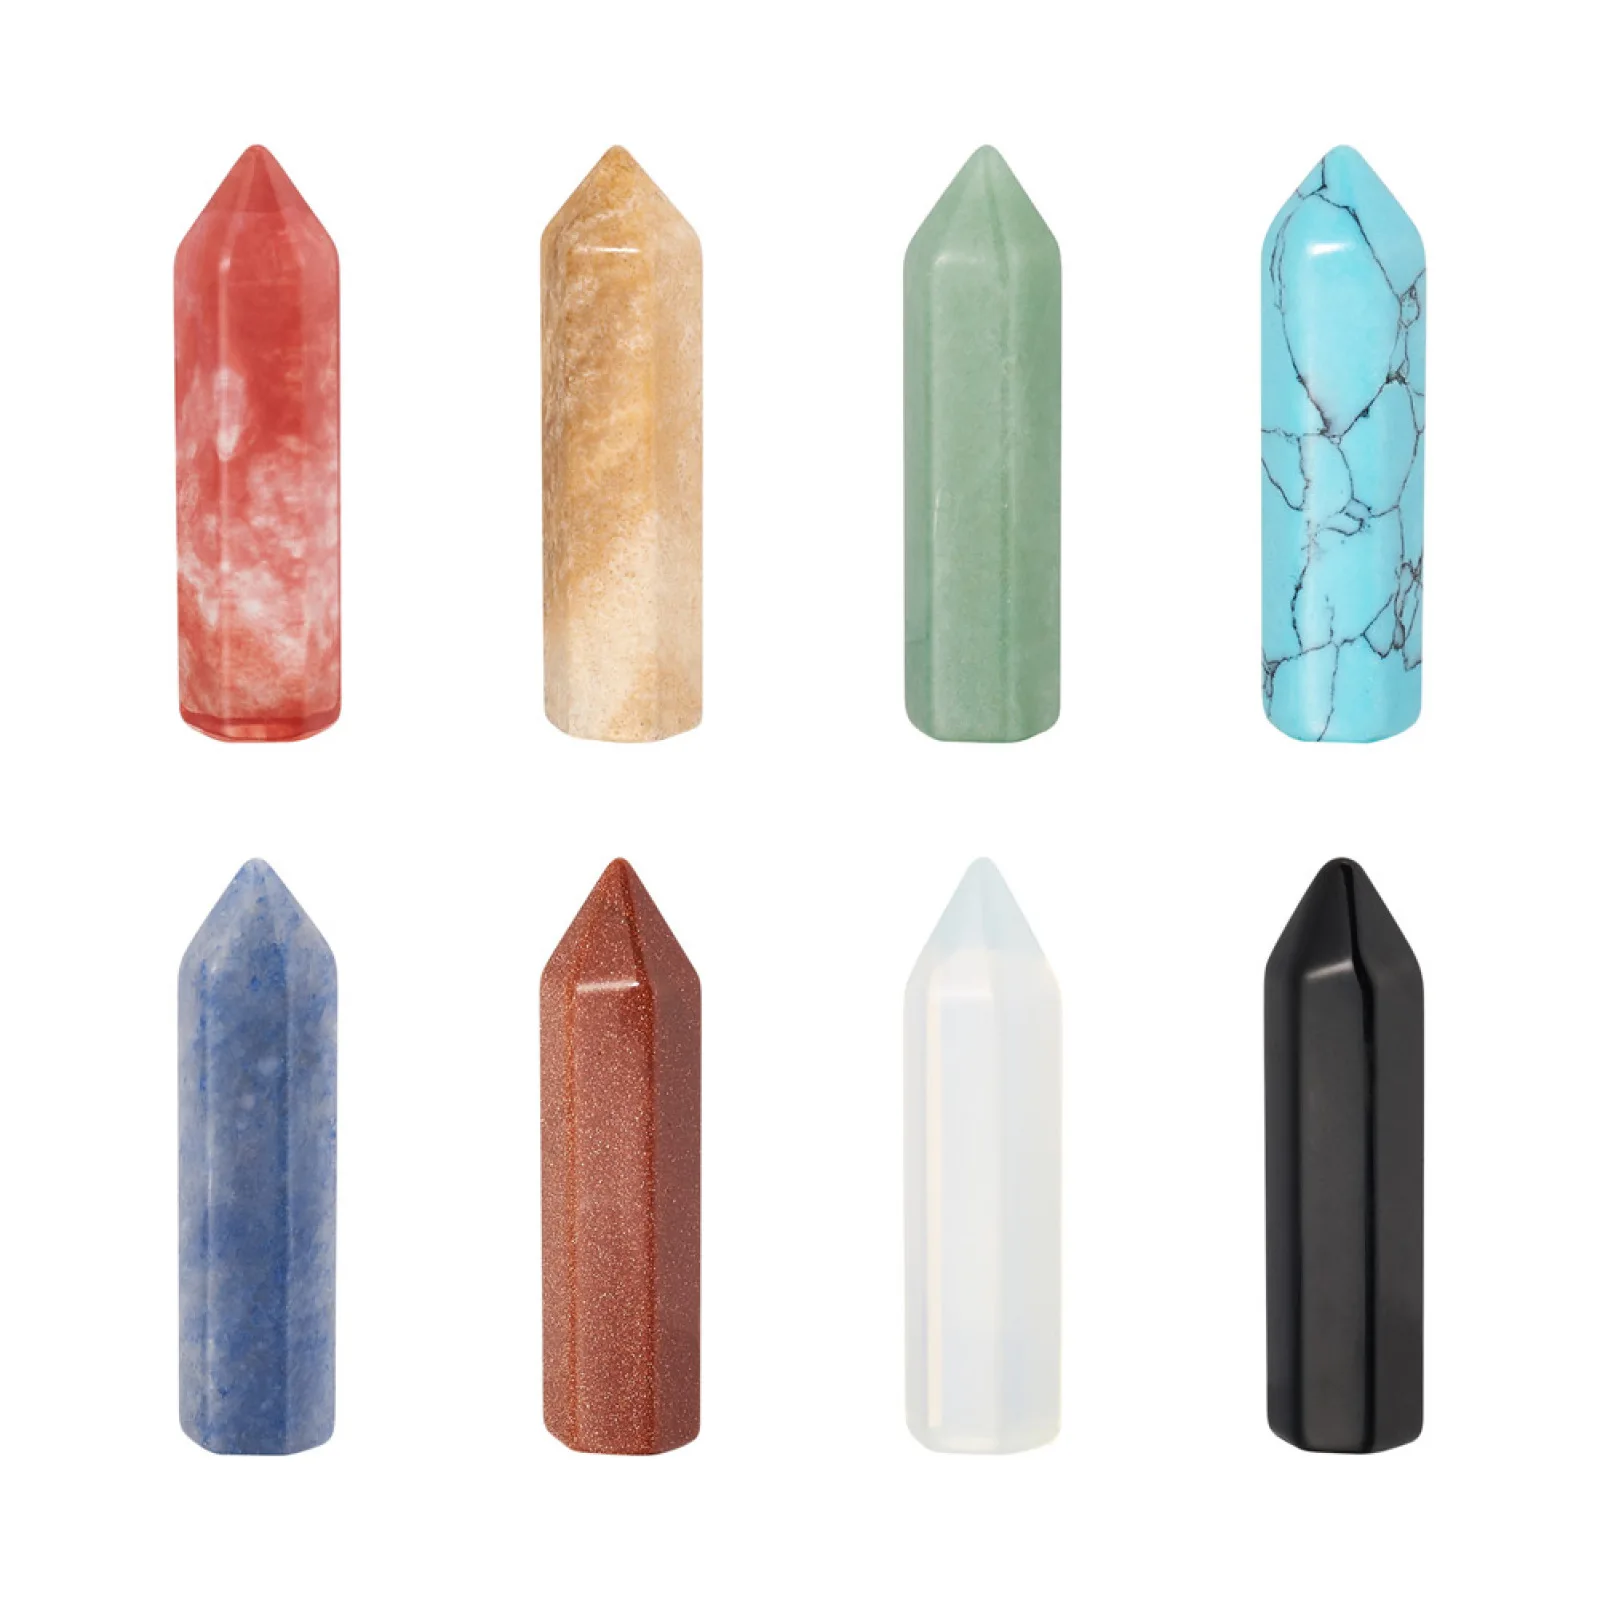 8Pcs Bullet Shape No Hole Gemstone Natural Quartz Pointed Beads Wire Wrapped Crystal Pendant Charm for Women Necklace Making DIY